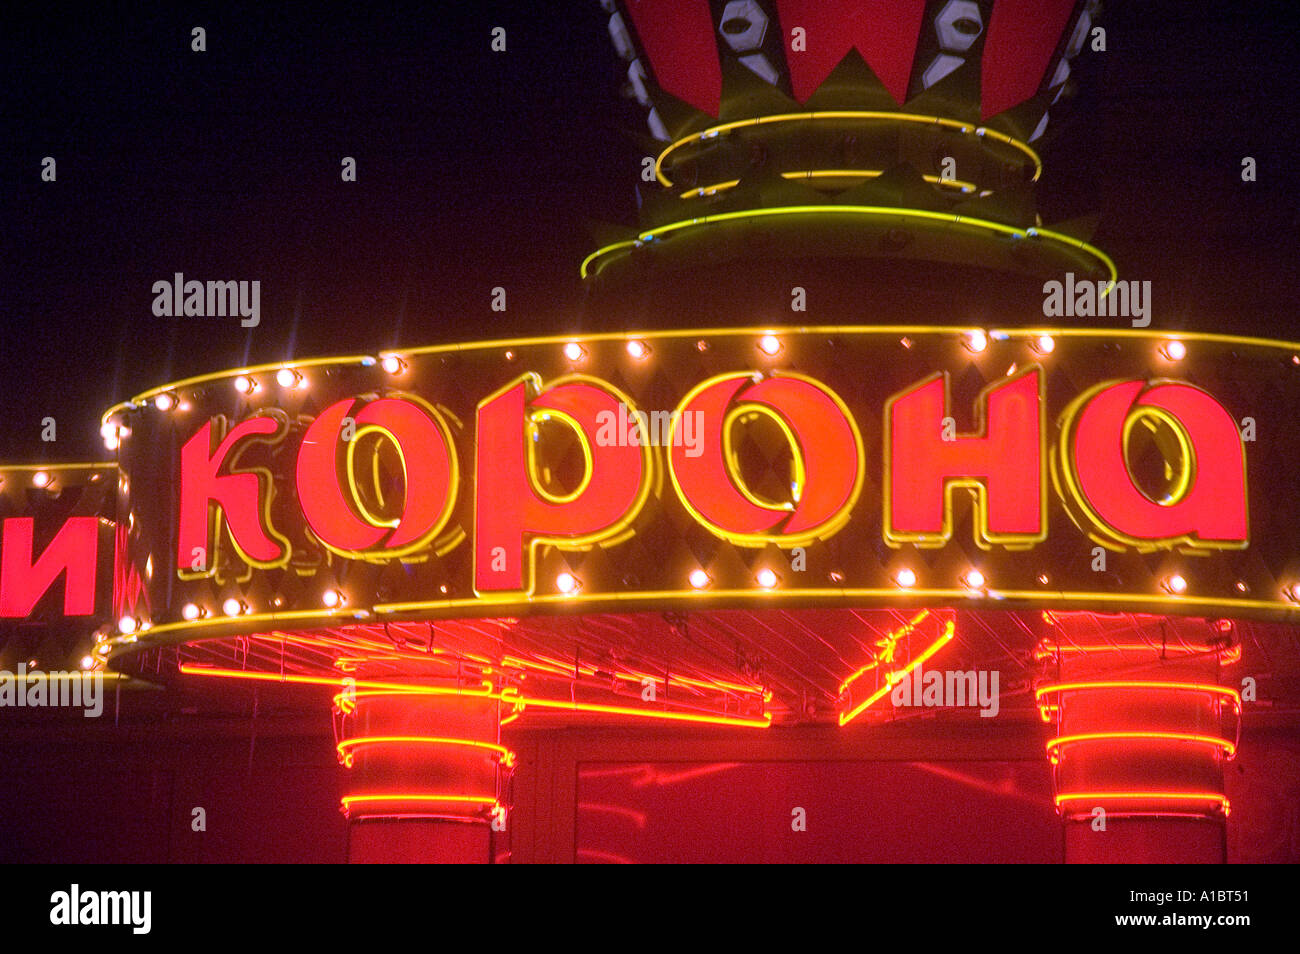 A casino in Moscow Russia, prior to the July 2009 banning of gambling in Russia. Stock Photo